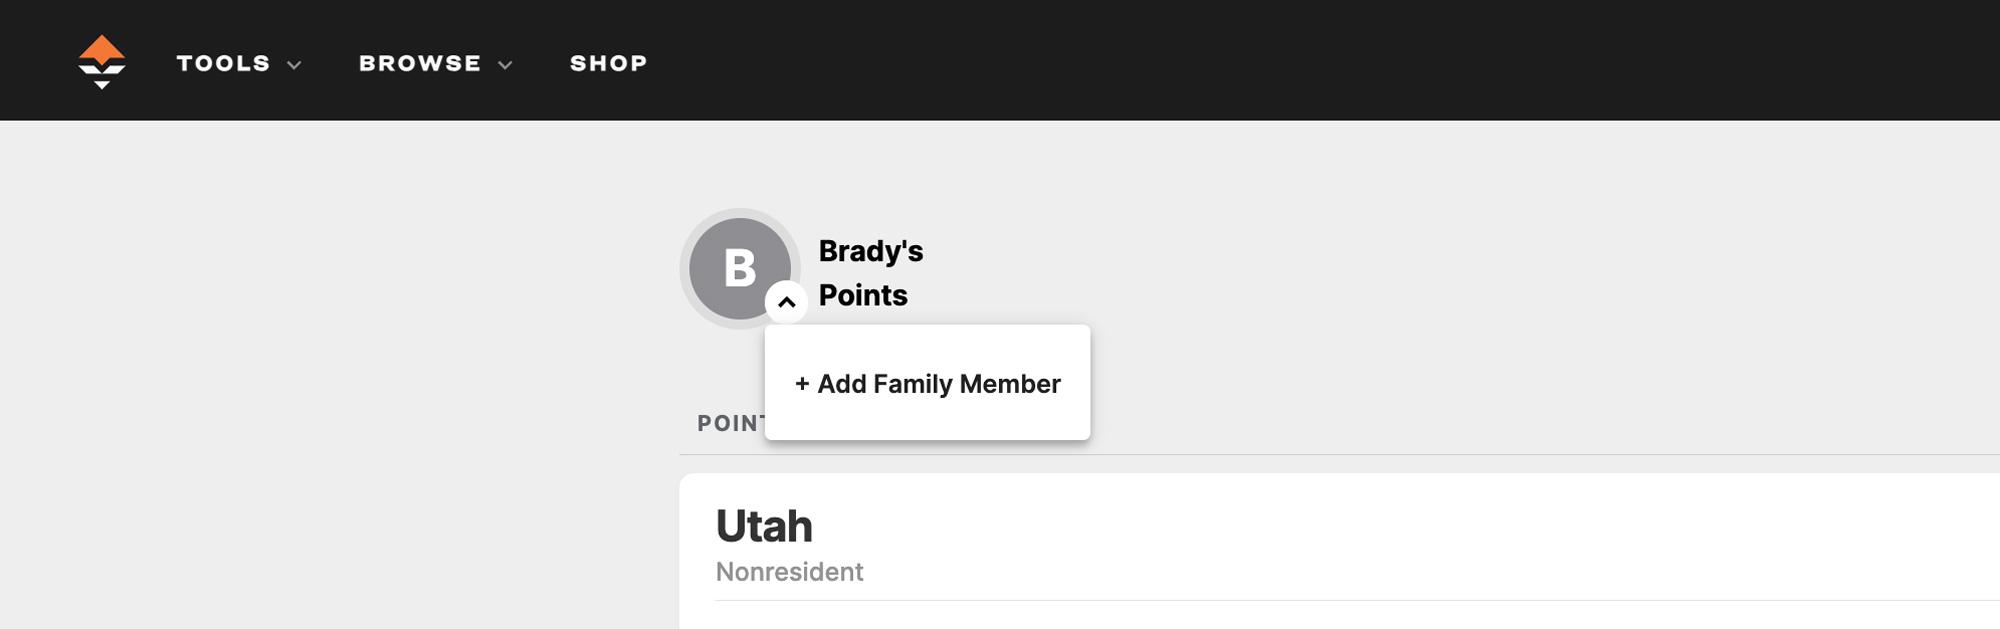 Adding a family member to Point Tracker